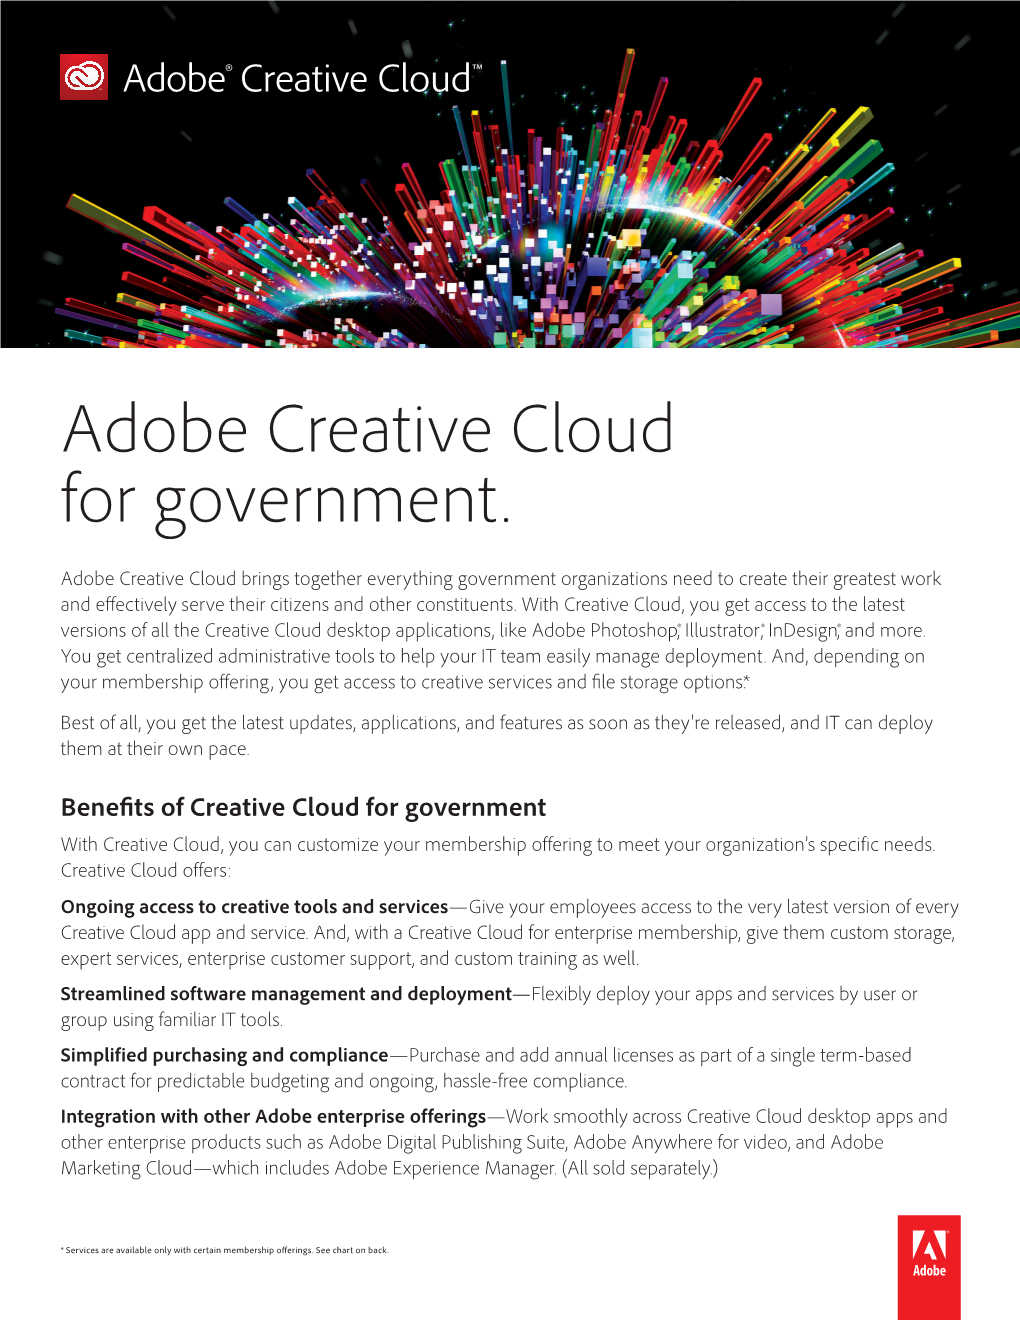 Adobe Creative Cloud for Government